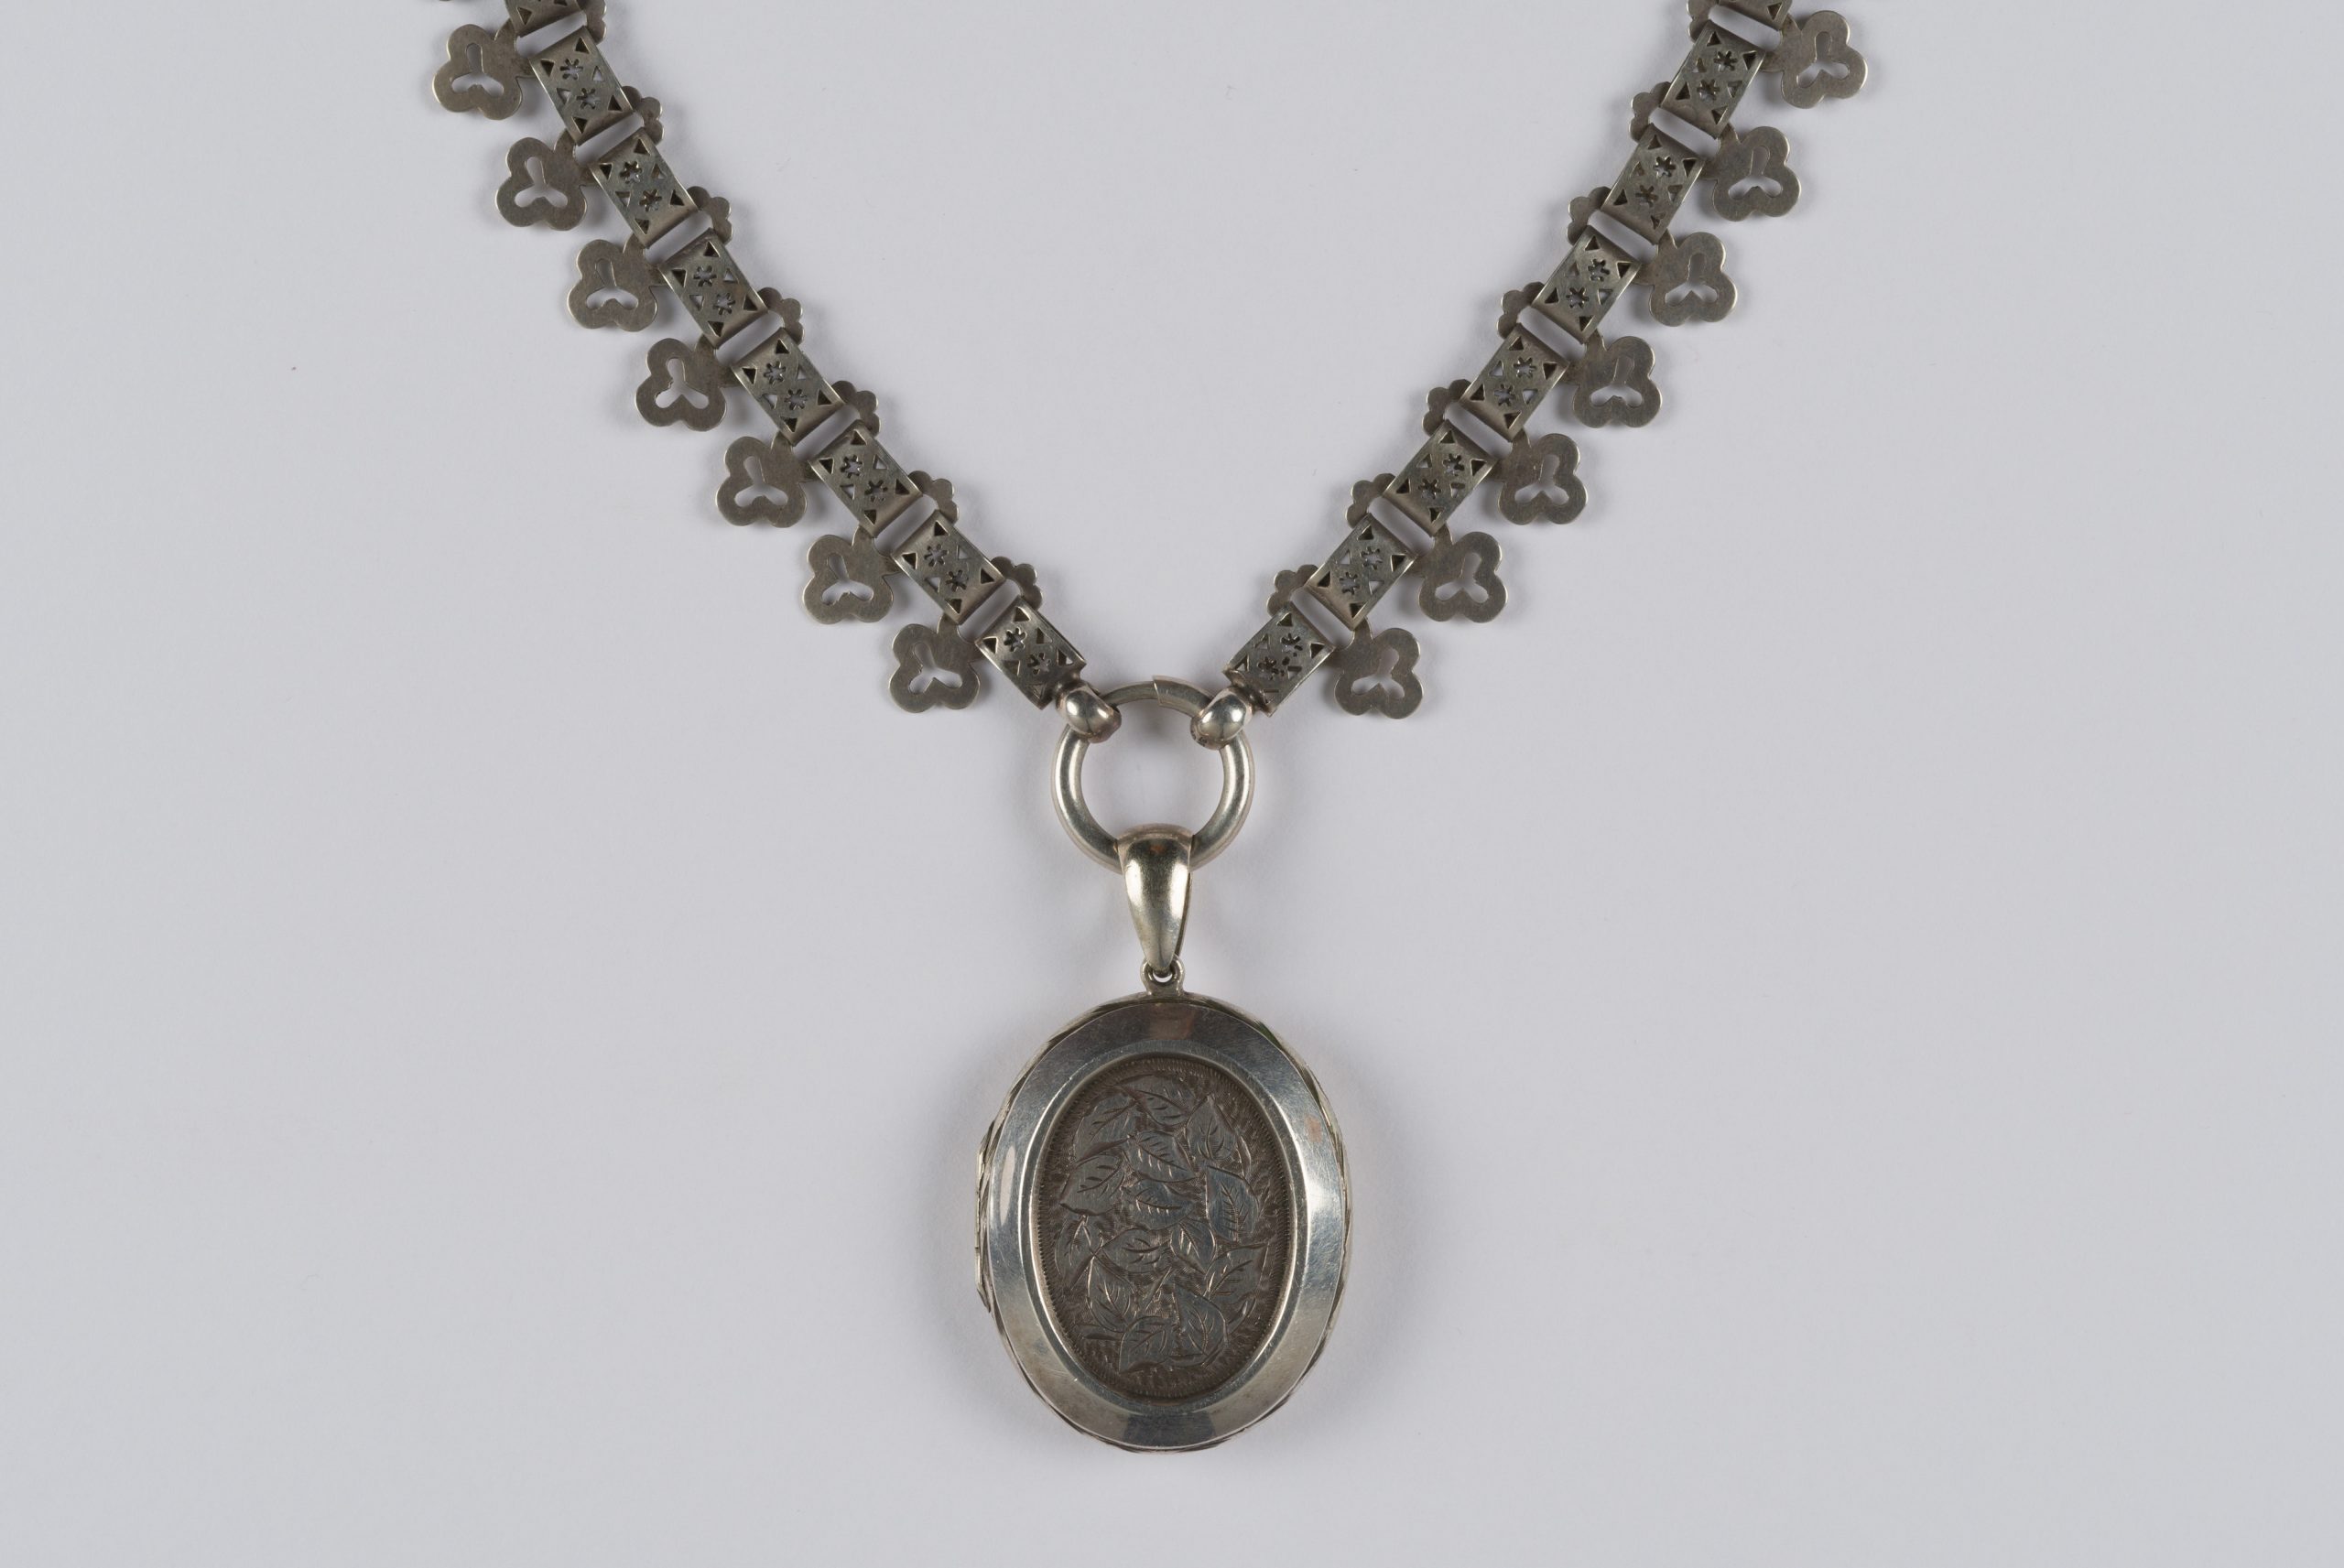 oval locket on a thick chain with clover-leaf design